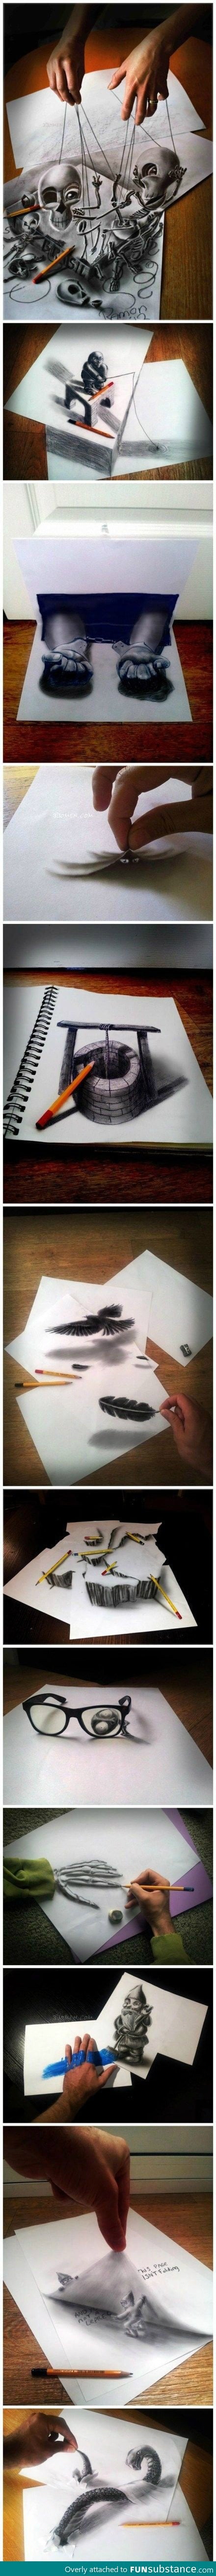 Awesome Interactive 3D Drawings